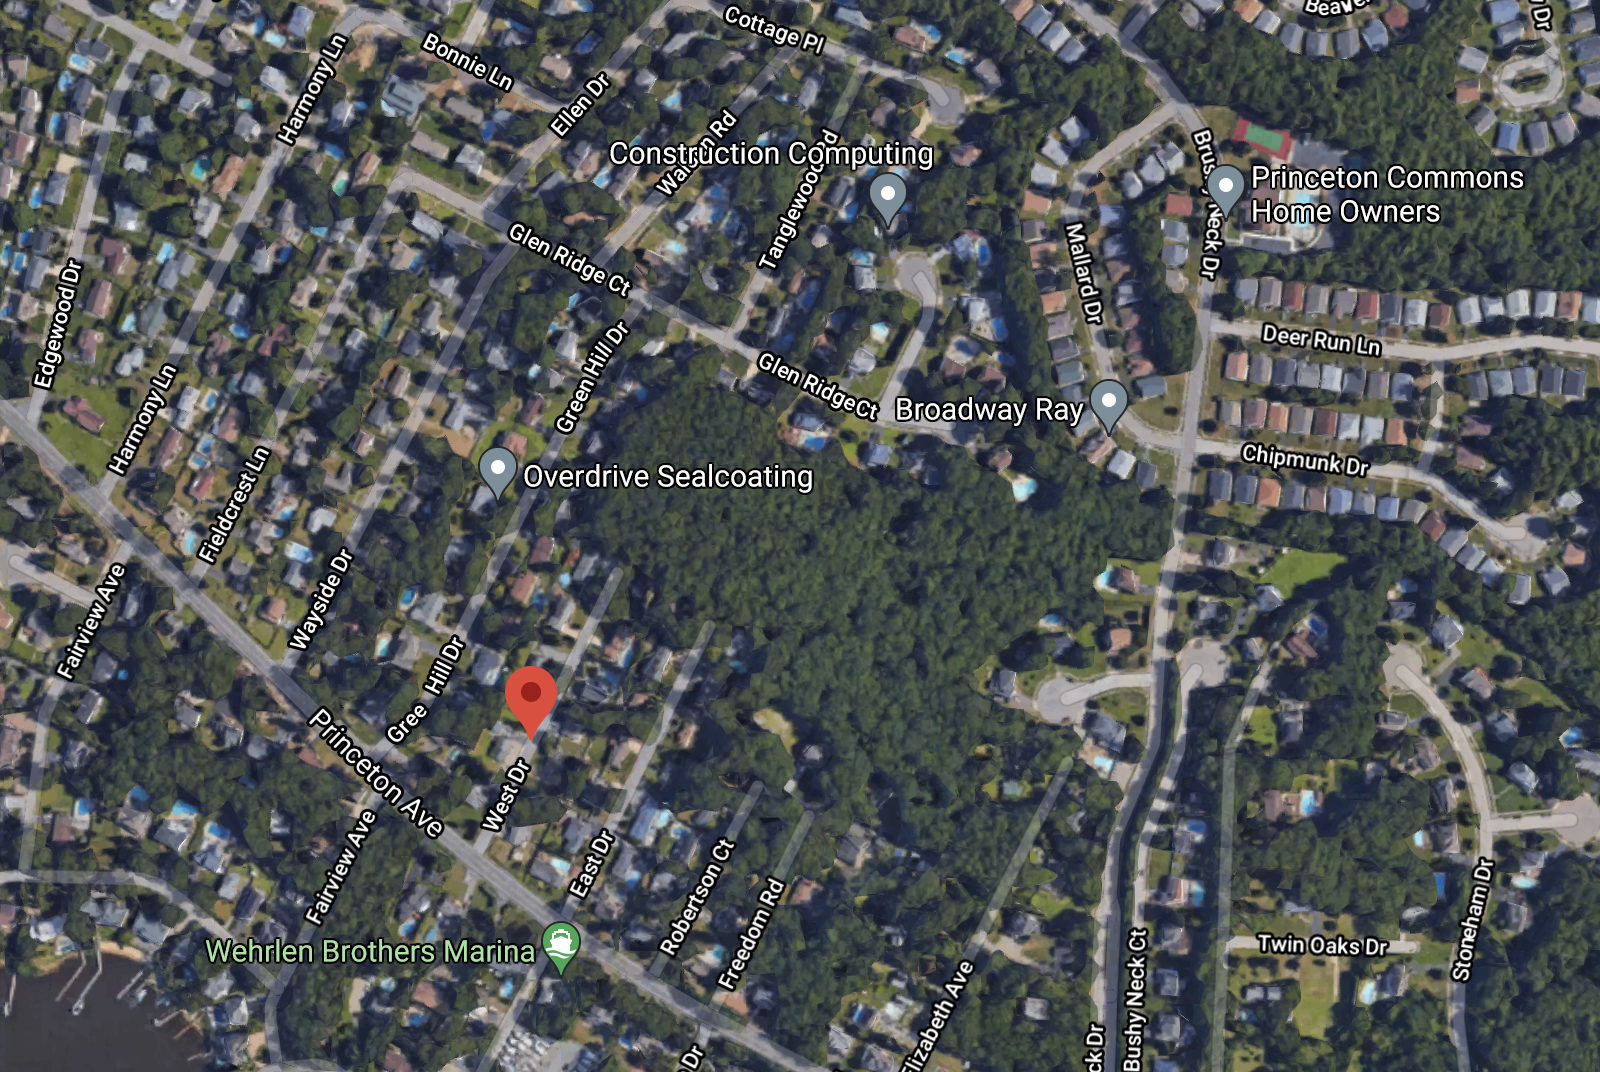 Open space off Princeton Avenue and Brushy Neck Drive in Brick, N.J. (Credit: Google Maps)